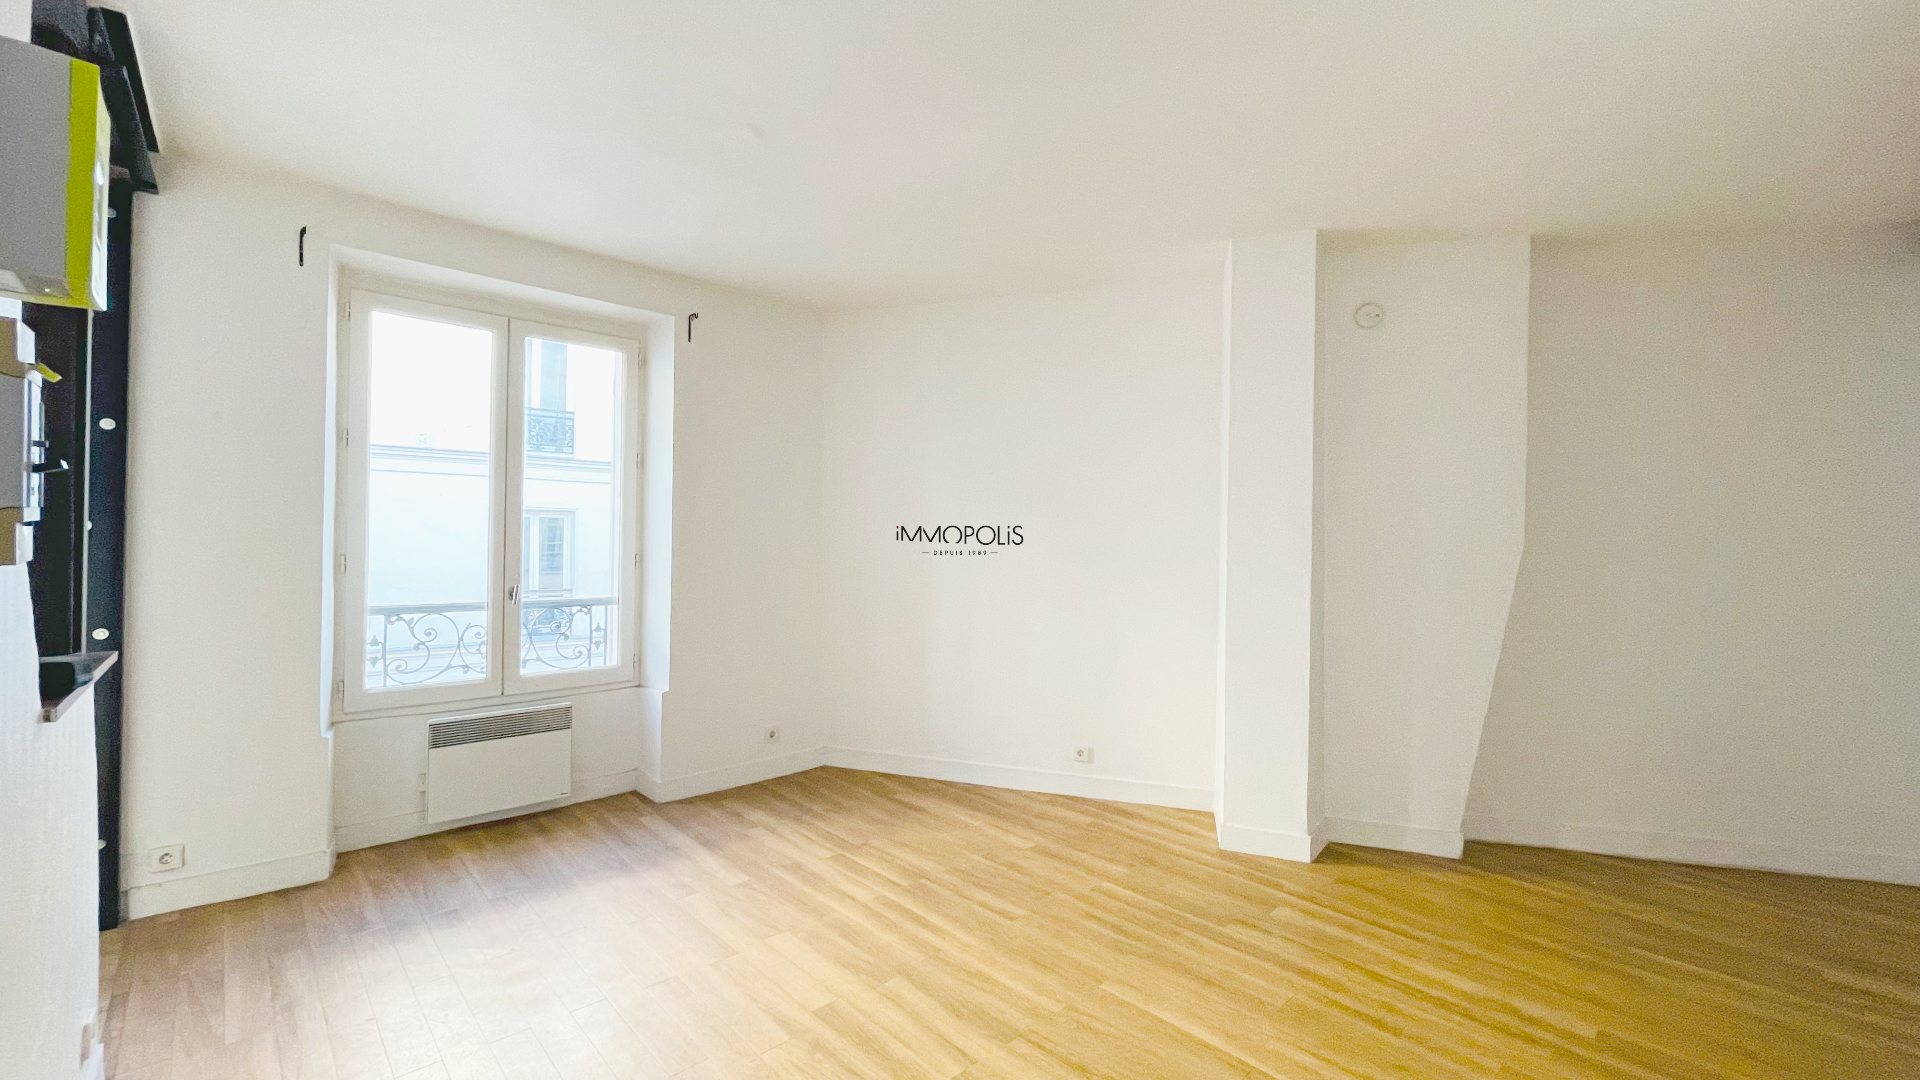 Beautiful studio in Montmartre, 30 m² without loss of space located in a swallowed building 2